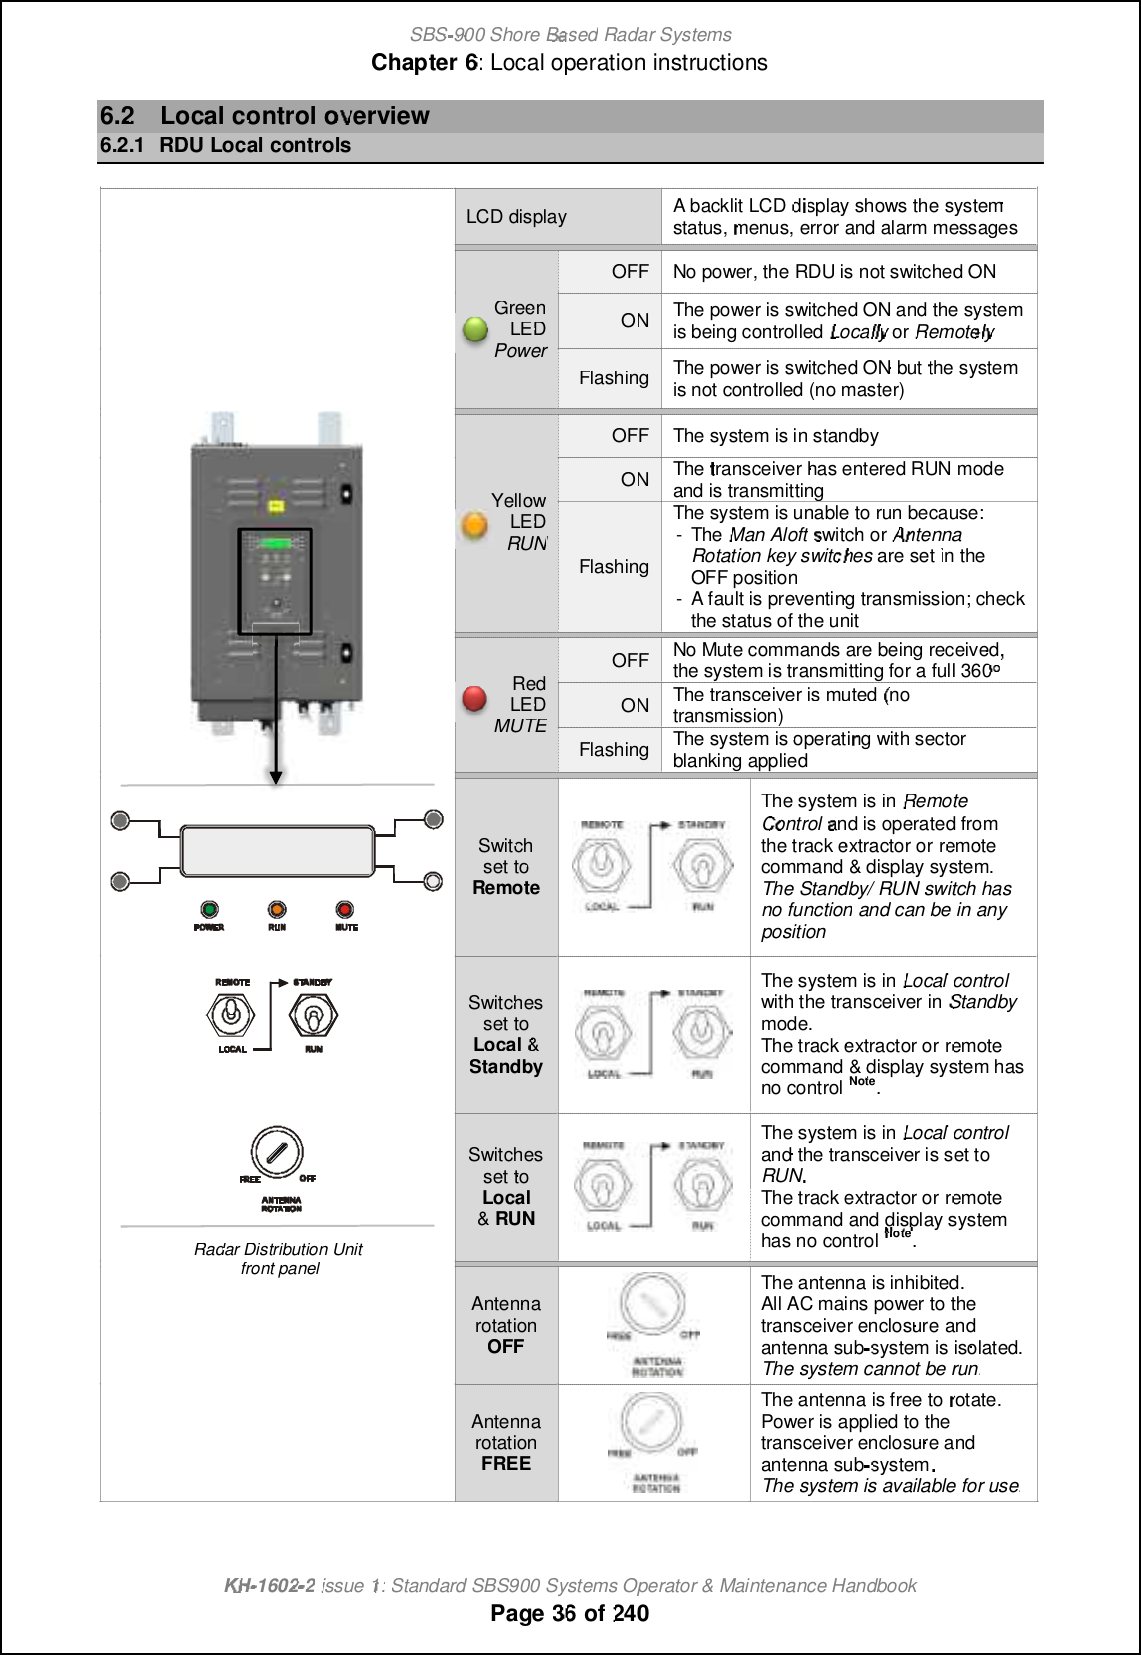 SBS-900 ShoreBaBasedRadar SystemsChapter6:Local operation instructionsKHKH-1602 2issue 1:Standard SBS900 Systems Operator &amp; Maintenance HandbookPage3636of2406.2Local control overview6.2.1RDULocalcontrolsRadar Distribution Unitfront panelLCD displayA backlit LCDdisplay shows the systemstatus,menus, error and alarm messagesGreenGreenLEDLEDPowerPowerOFFOFFNo power, the RDU is not switched ONONONThe power is switched ON and the systemisbeing controlledLocallylyorRemotelylyFlashingThe power is switched ONbutthe systemisnot controlled (no master)YellowYellowLEDLEDRUNRUNOFFThe system is in standbyONONThetransceiverhas entered RUN modeand is transmittingFlashingThe system is unable to run because:-TheMan Aloftswitch orAntennaRotationkey switchesare setin theOFF position-A fault is preventing transmission; checkthe status of the unitRedRedLEDLEDMUTEMUTEOFFNo Mute commands are being receivedthe system is transmitting for a full 360ONONThe transceiver is muted(notransmission)FlashingThe system is operating with sectorblanking appliedSwitchset toRemoteThe system is inRemoteControland is operated fromthe track extractor orremotecommand&amp;display system.The Standby/ RUN switch hasno functionand can be in anypositionSwitchesSwitchesset toLocal&amp;StandbyThe system is inLocalcontrolwith the transceiver inStandbymode.The track extractor orremotecommand&amp;display system hasno controlNote.SwitchesSwitchesset toLocal&amp;RUNThe system is inLocalcontroland the transceiver is set toRUNThe track extractor orremotecommand and display systemhas no controlNote.AntennarotationOFFThe antenna is inhibited.All AC mains power to thetransceiver enclosureandantenna subsystemis isolated.The system cannot be run.AntennarotationFREEThe antenna is free torotate.Power is applied to thetransceiver enclosure andantenna subsystem.The system is available for use.